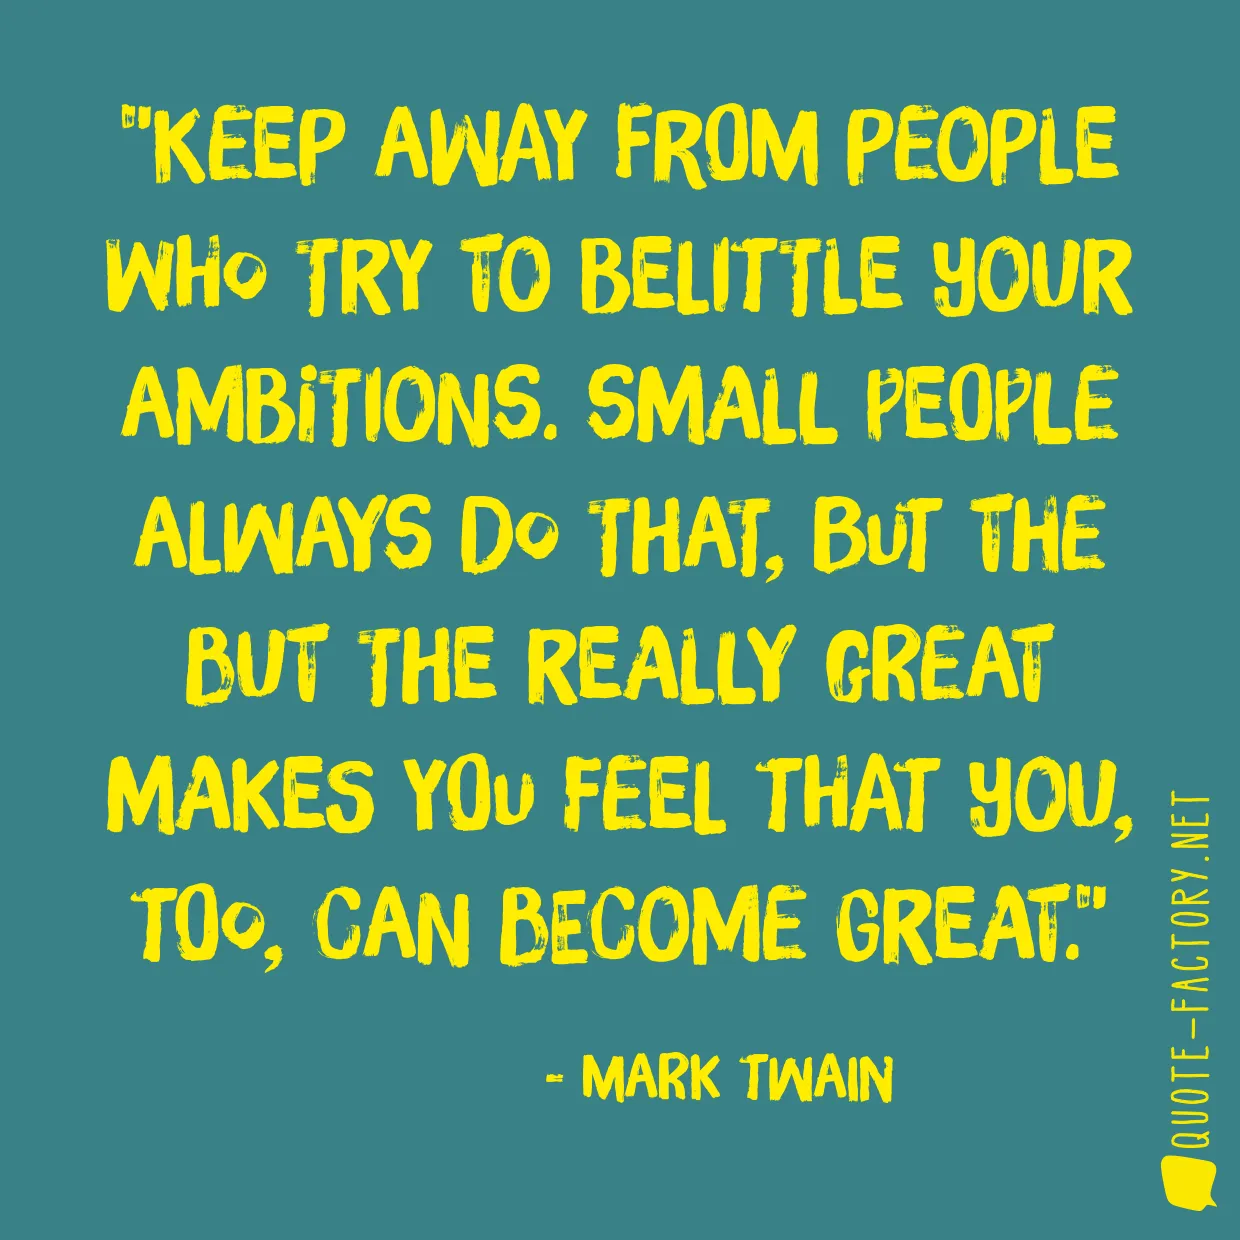 Keep away from people who try to belittle your ambitions. Small people always do that, but the but the really great makes you feel that you, too, can become great.